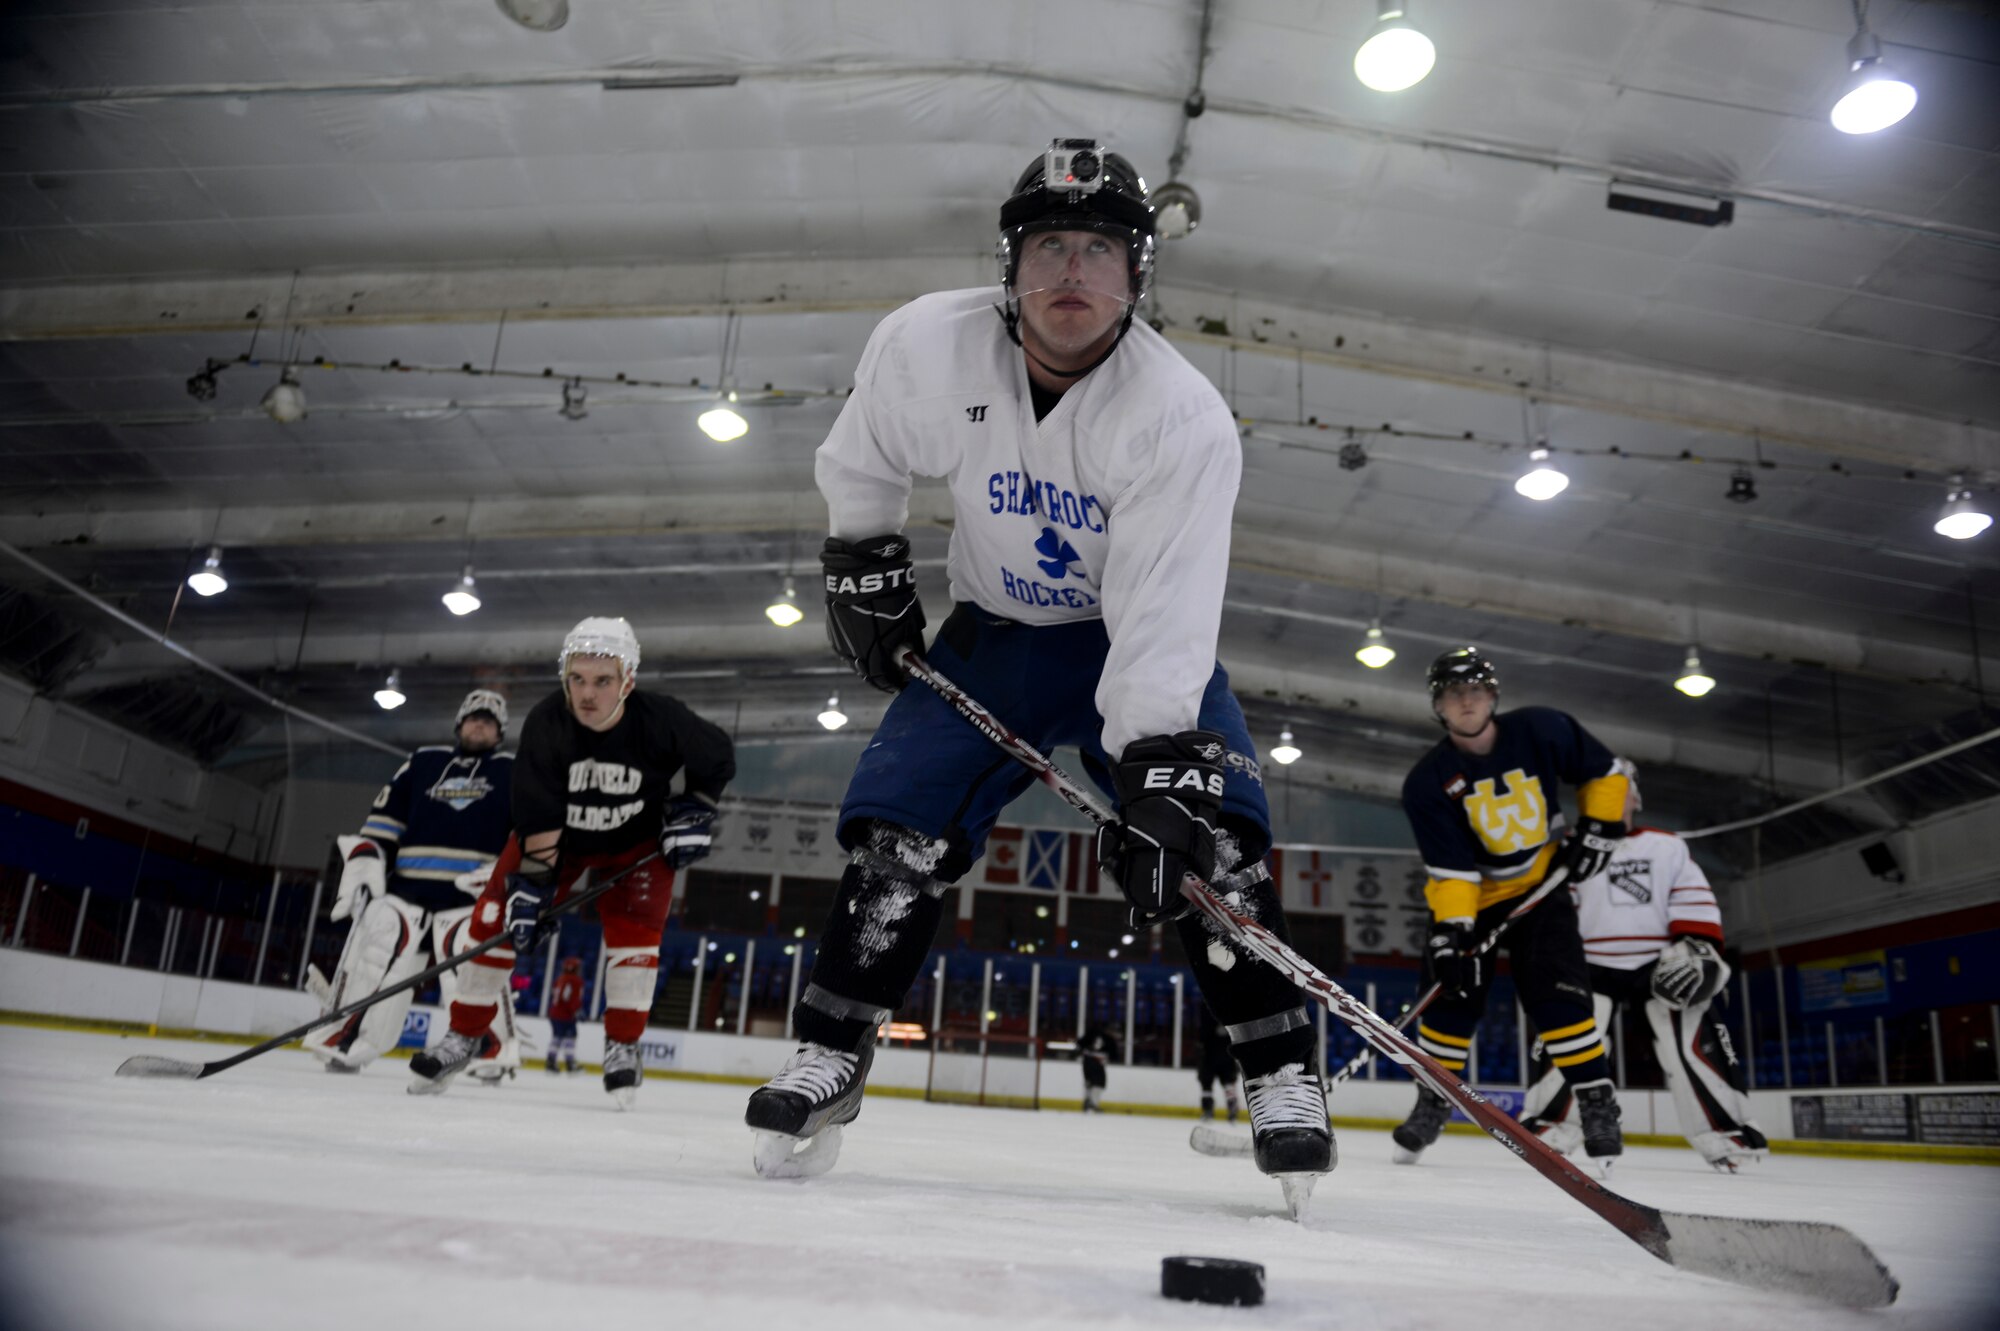 PETERBOROUGH, England - Members of the U.K. Warbirds hit the ice during a practice session March 29, 2013. The team is accepting new players and is open to all U.S. service members serving in the U.K. (U.S. Air Force photo by Staff Sgt. Stephen Linch)